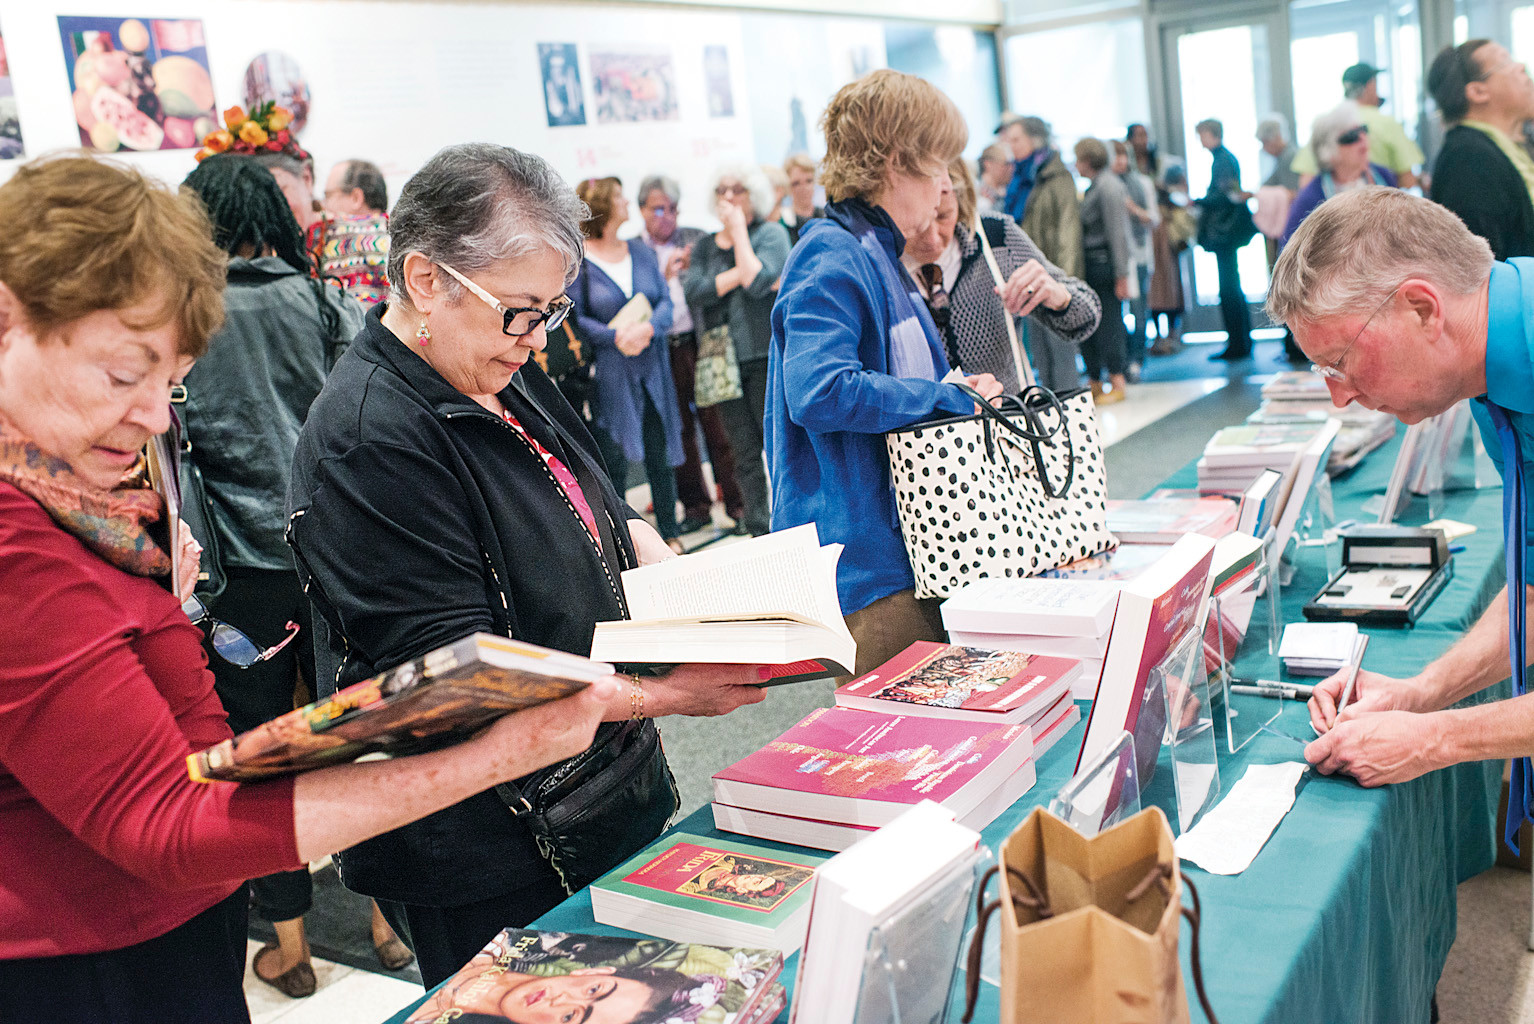 Members view the Frida Kahlo books for sale before a panel discussion on Mexican Art in the Ross Auditorium.